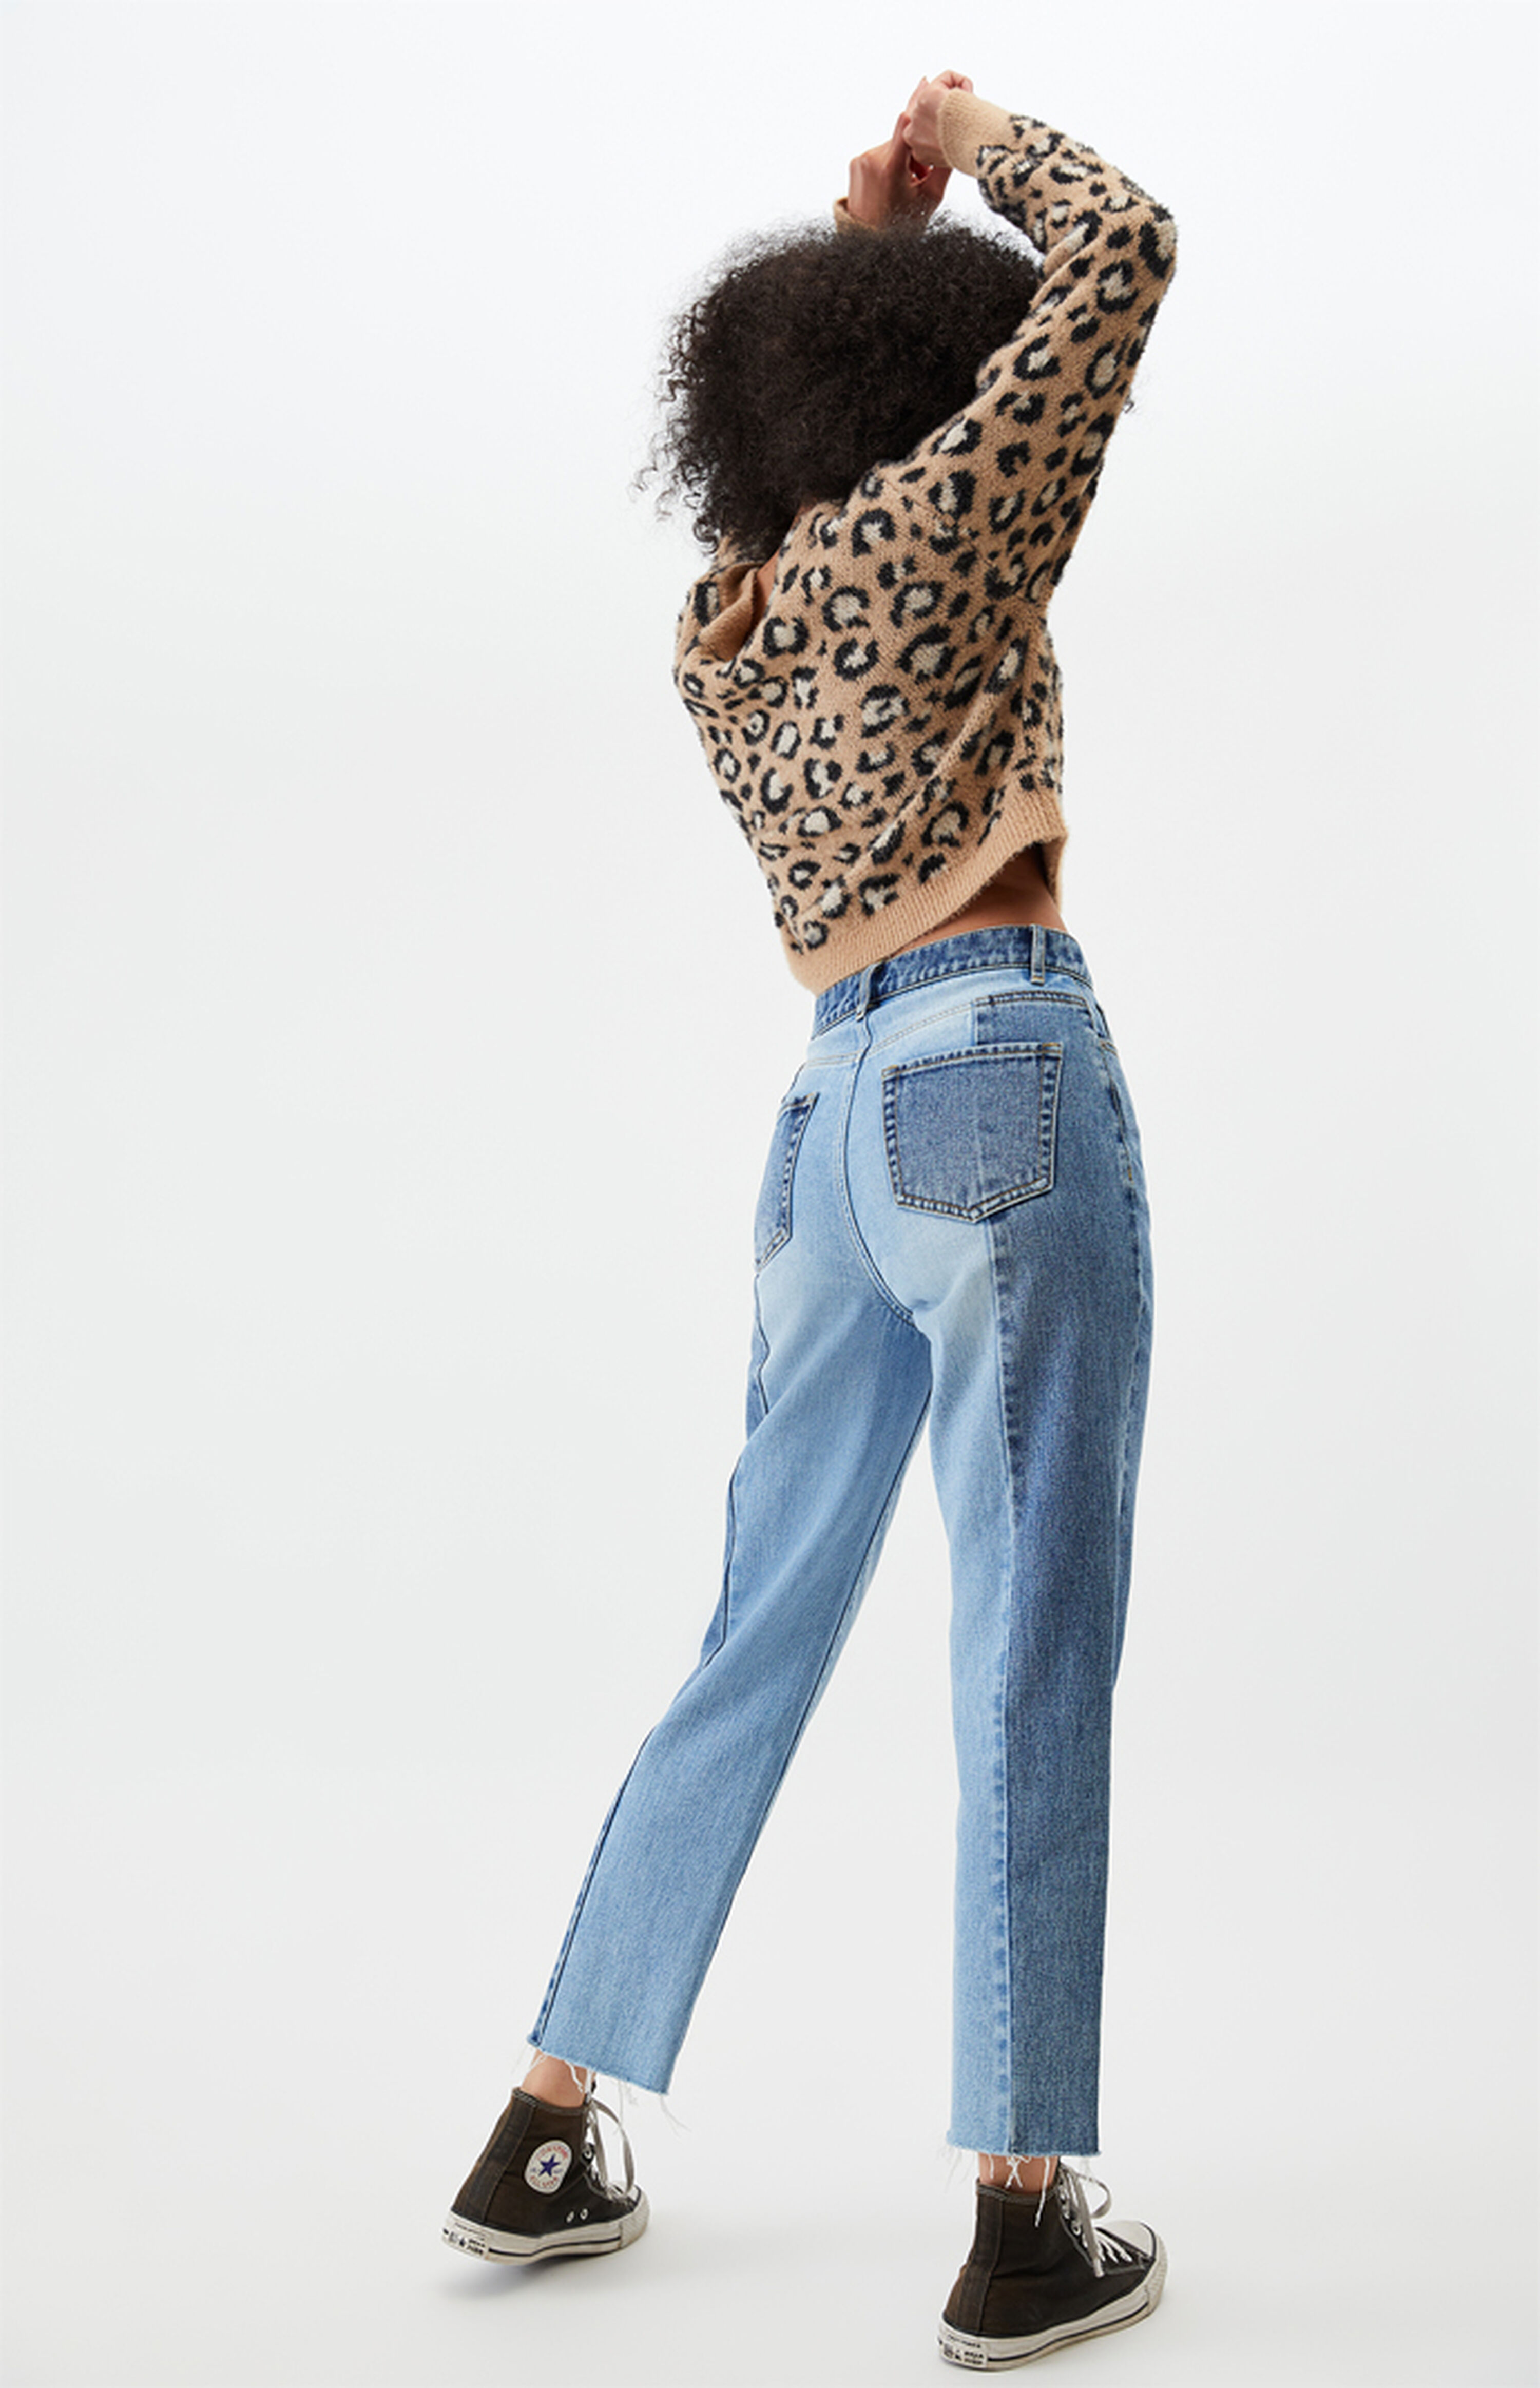 PacSun Two Panel High Waisted Straight Leg Jeans | PacSun